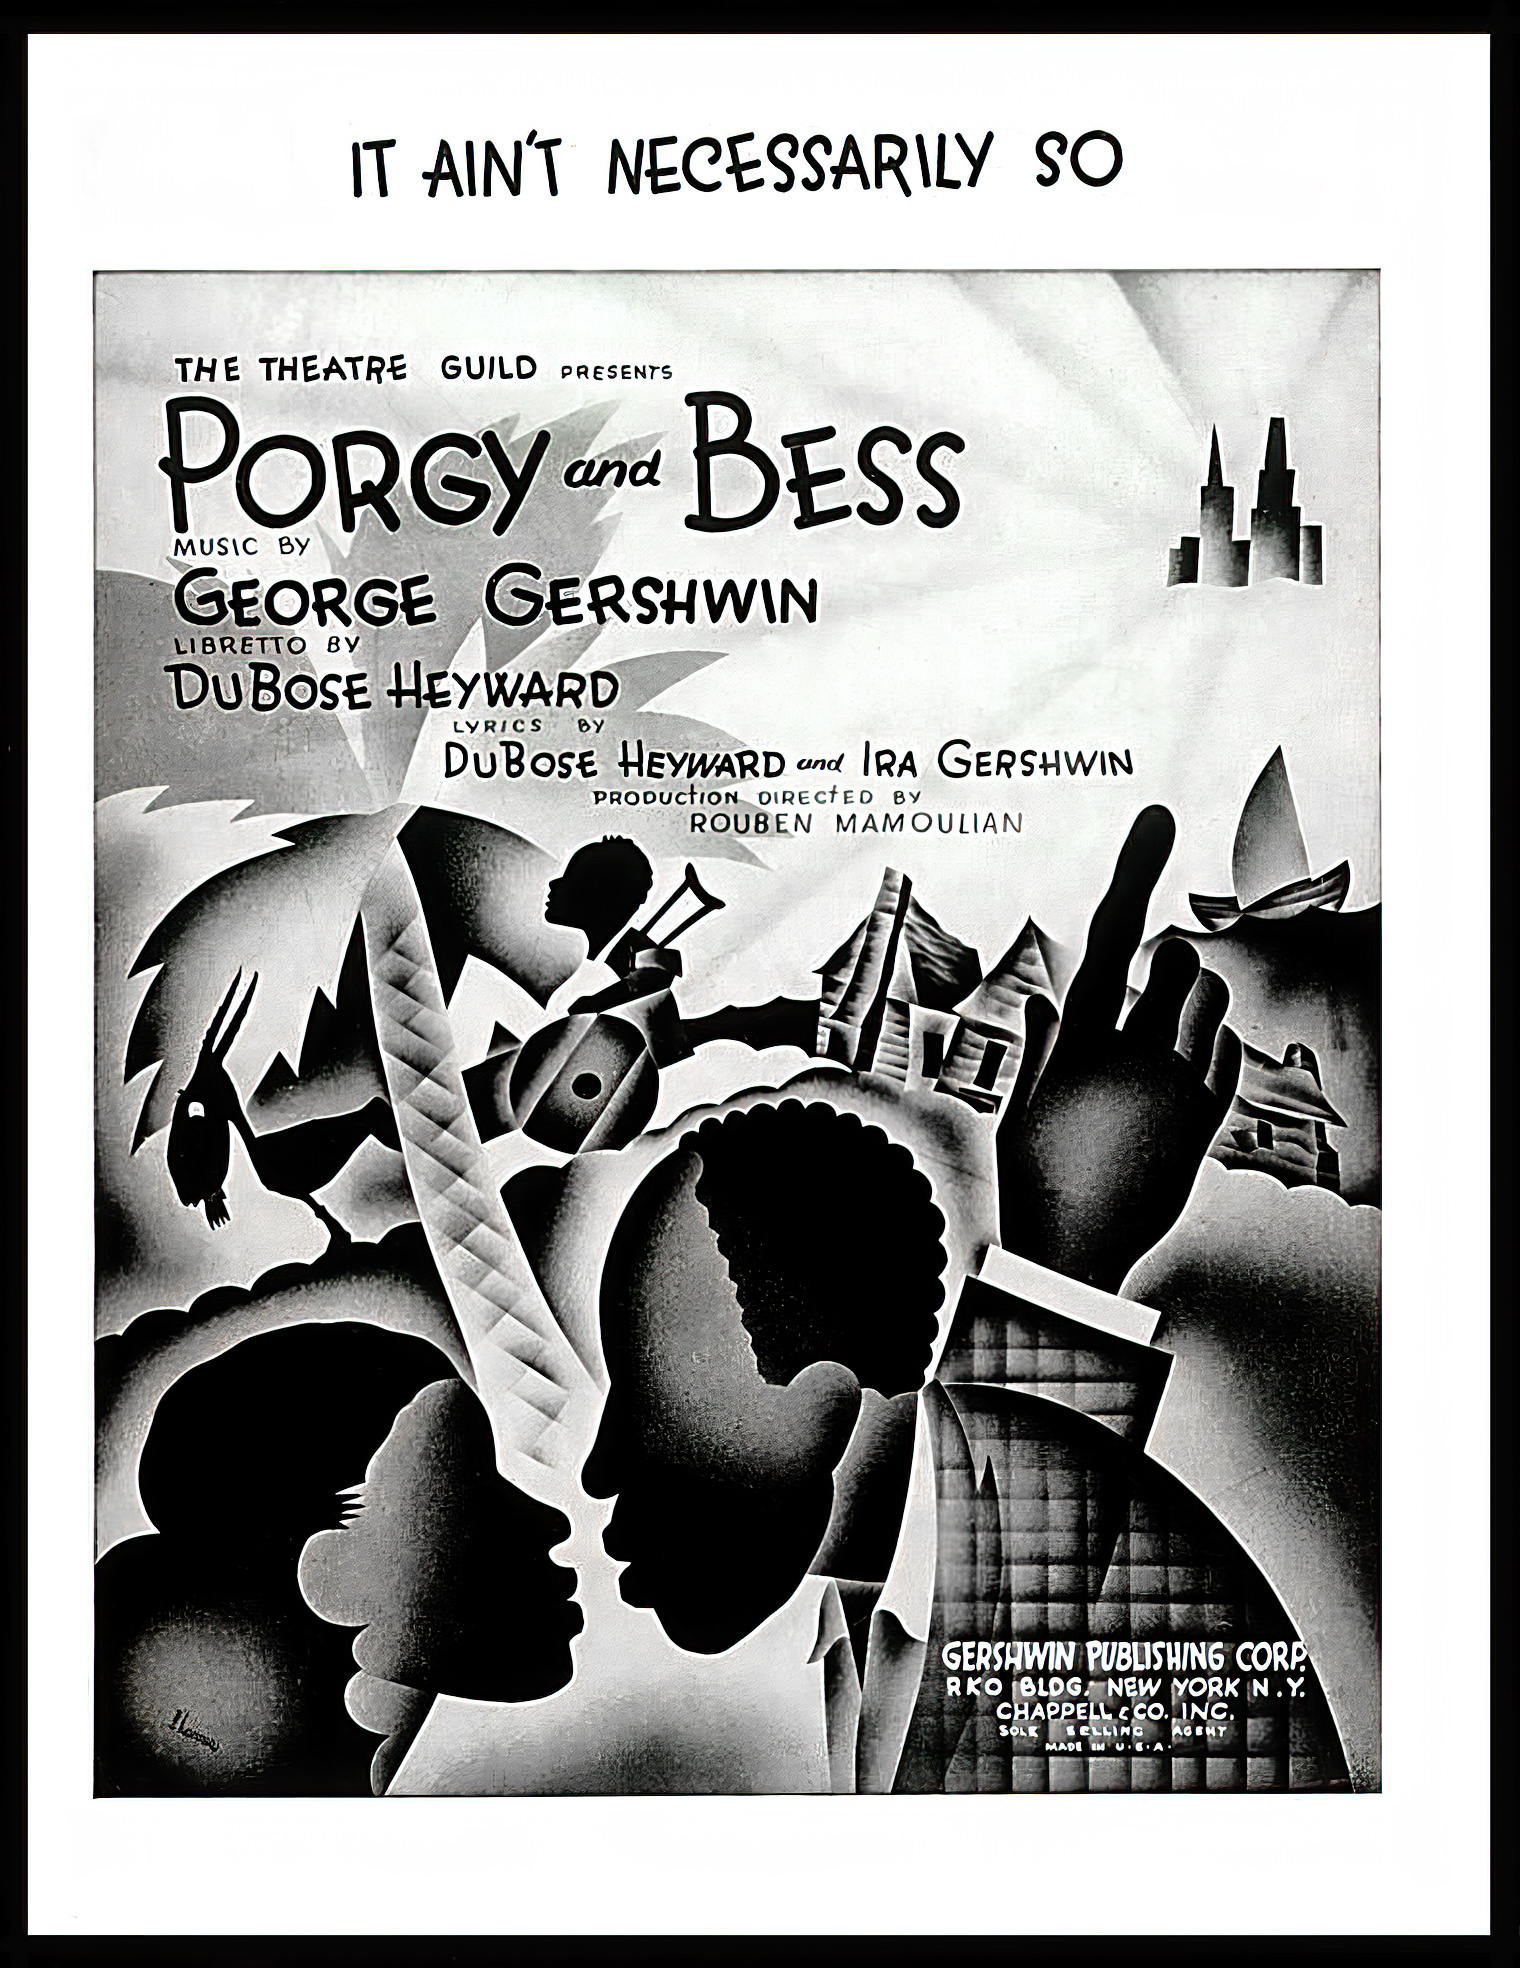 It Ain't Necessarily So | Sheet music cover from Gershwin's Porgy and Bess, c. 1935 | Strong National Museum of Play